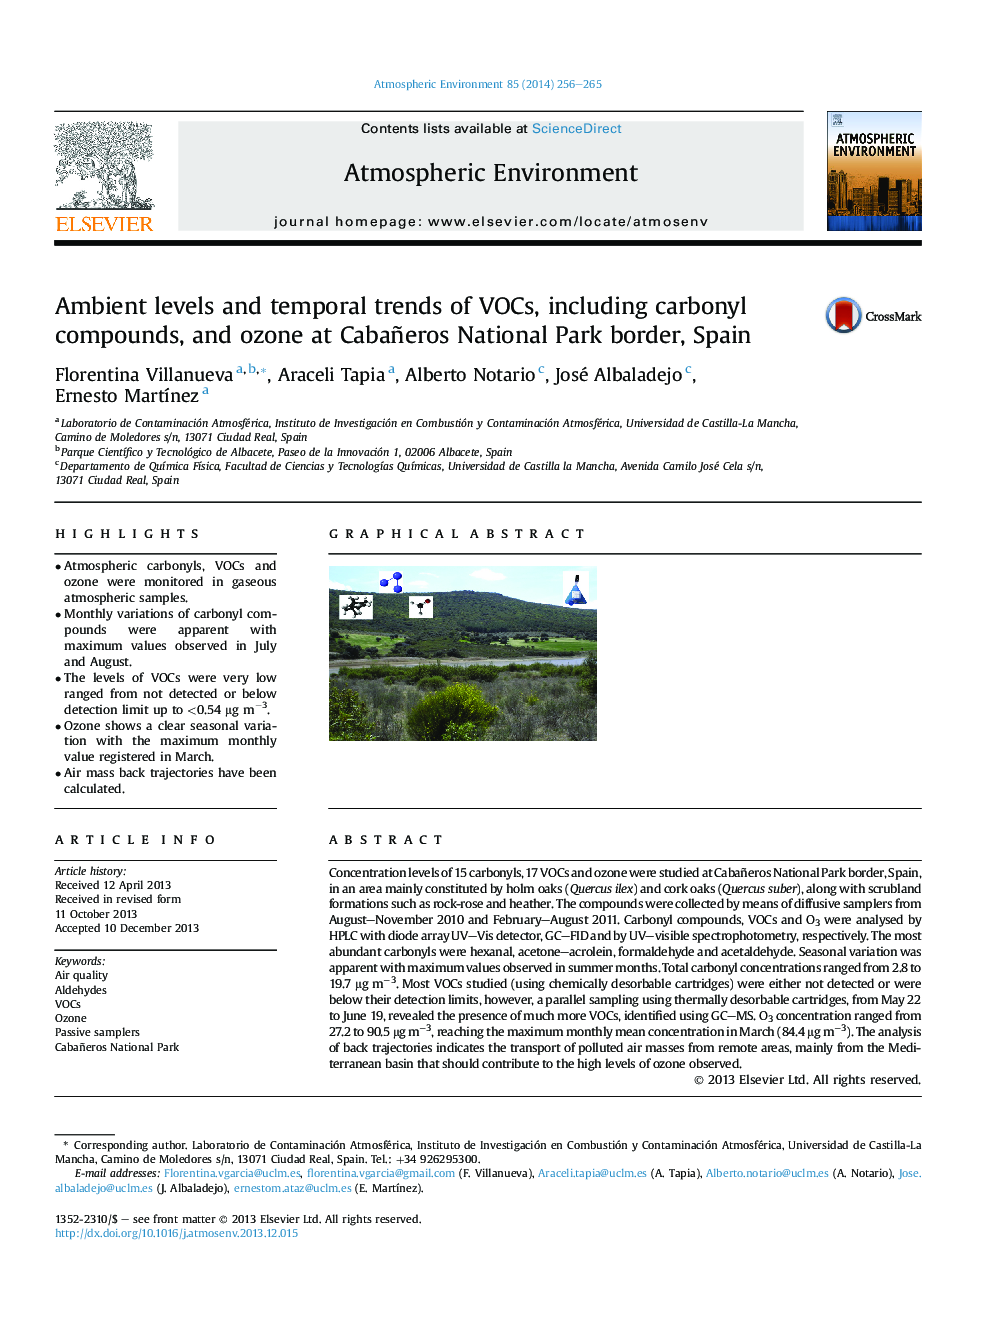 Ambient levels and temporal trends of VOCs, including carbonyl compounds, and ozone at Cabañeros National Park border, Spain